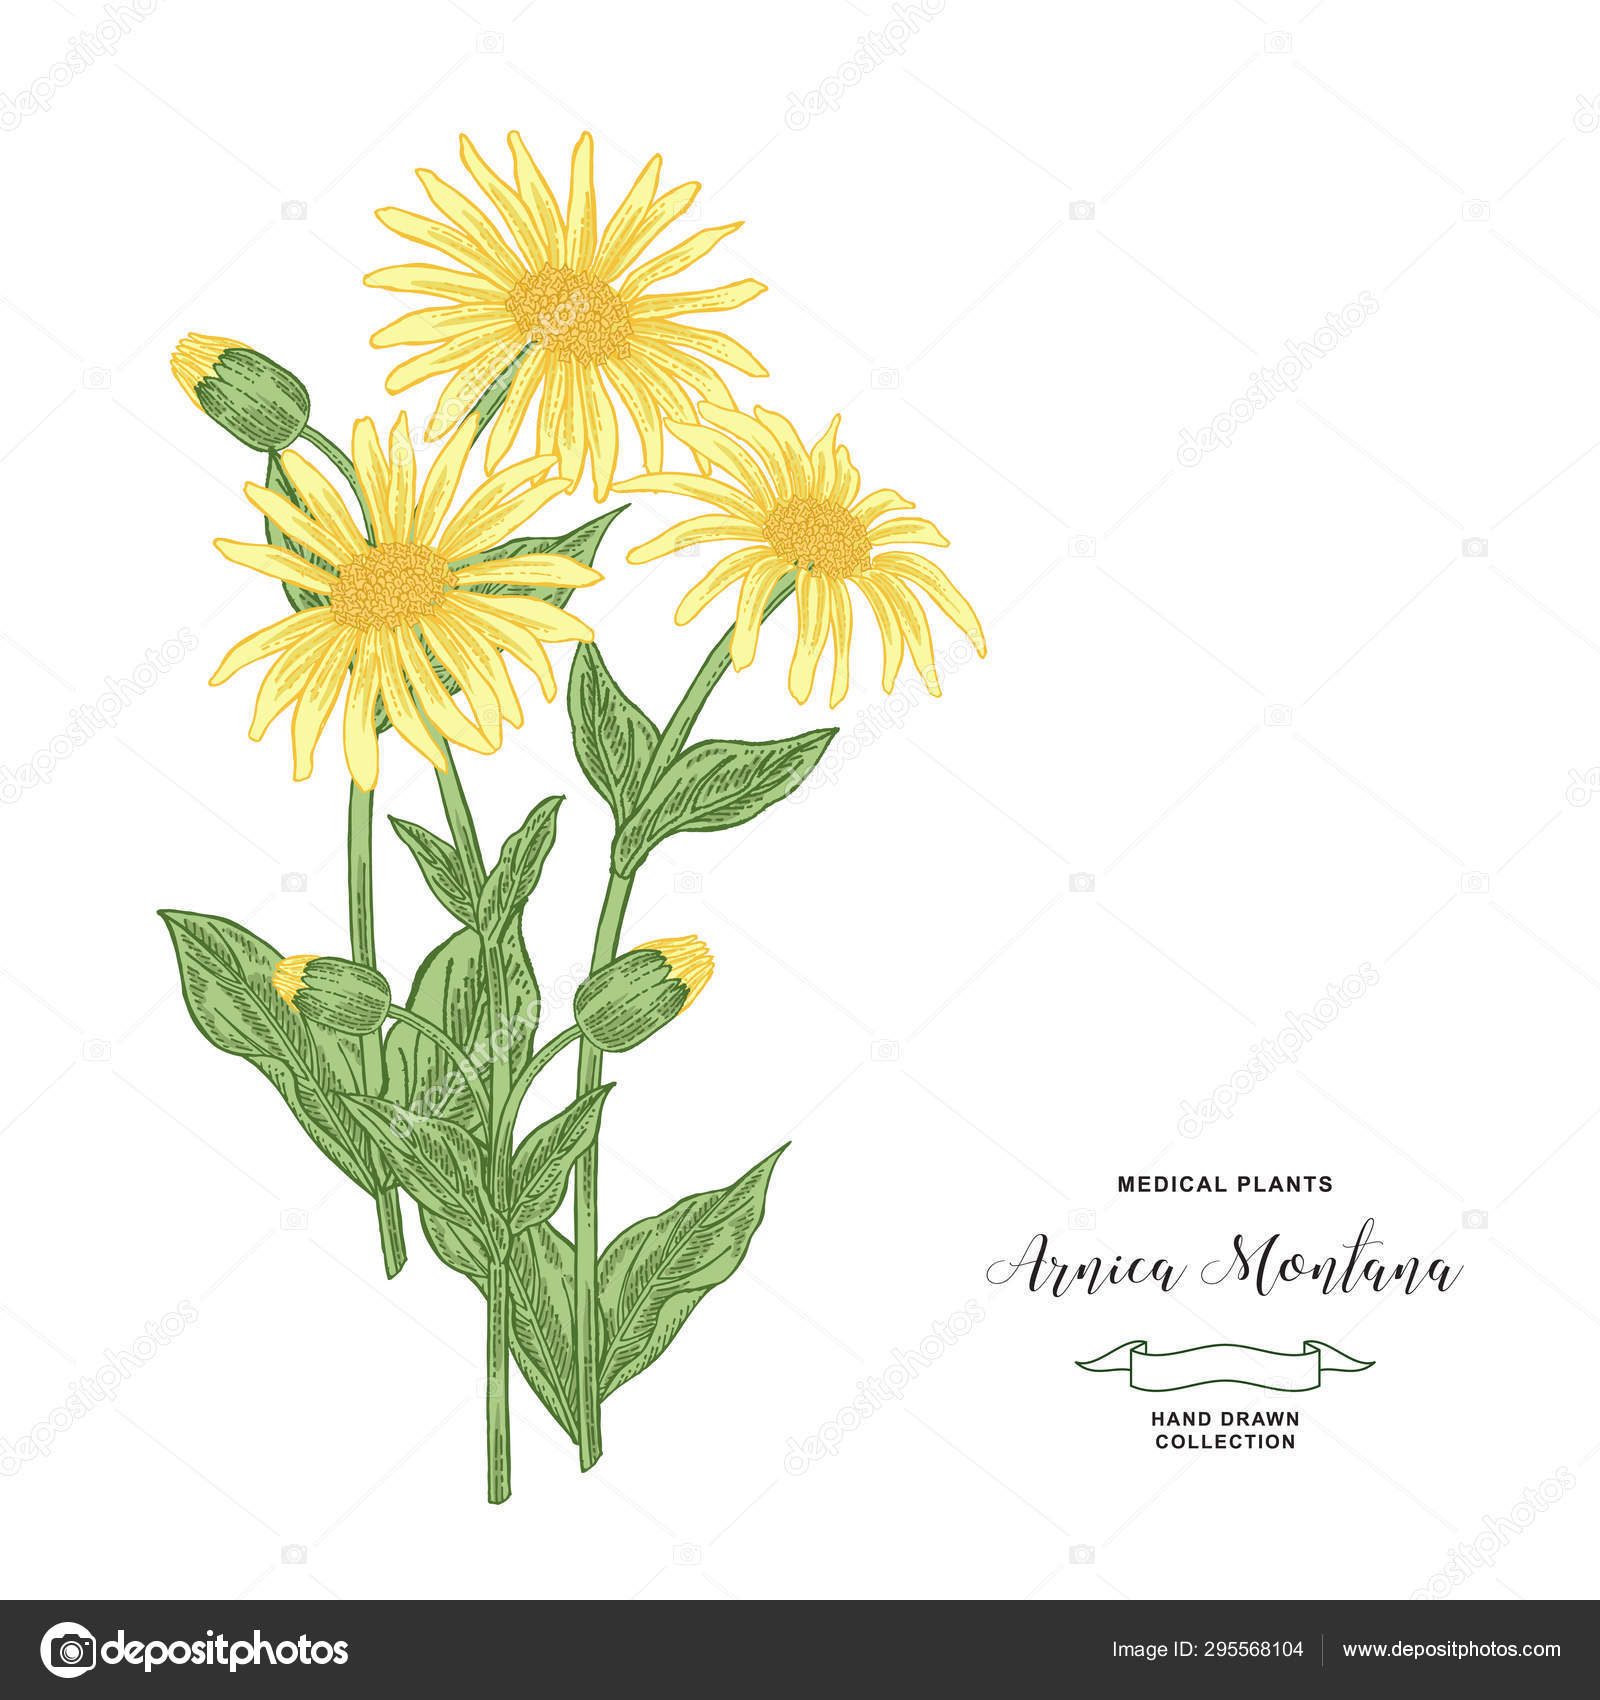 Arnica Montana Plant Hand Drawn Flowers And Leaves Of Arnica Medical Hebs Collection Vector Illustration Botanical Vintage Engraving Stock Vector Image By C Jka